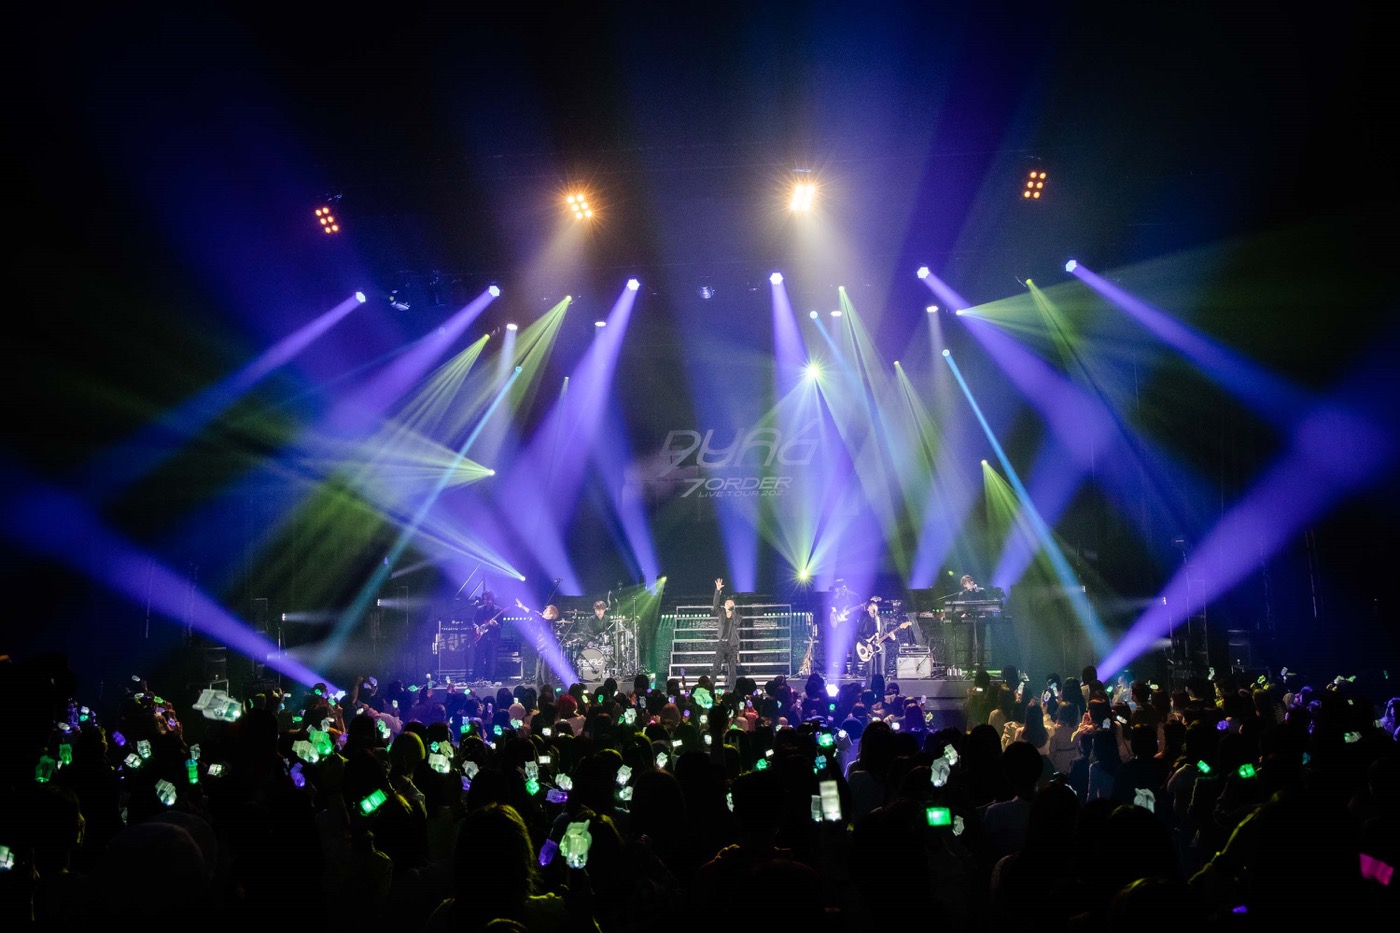 7ORDER、ツアー『7ORDER LIVE TOUR 2023 DUAL』開幕！ 追加公演決定 - 画像一覧（1/1）